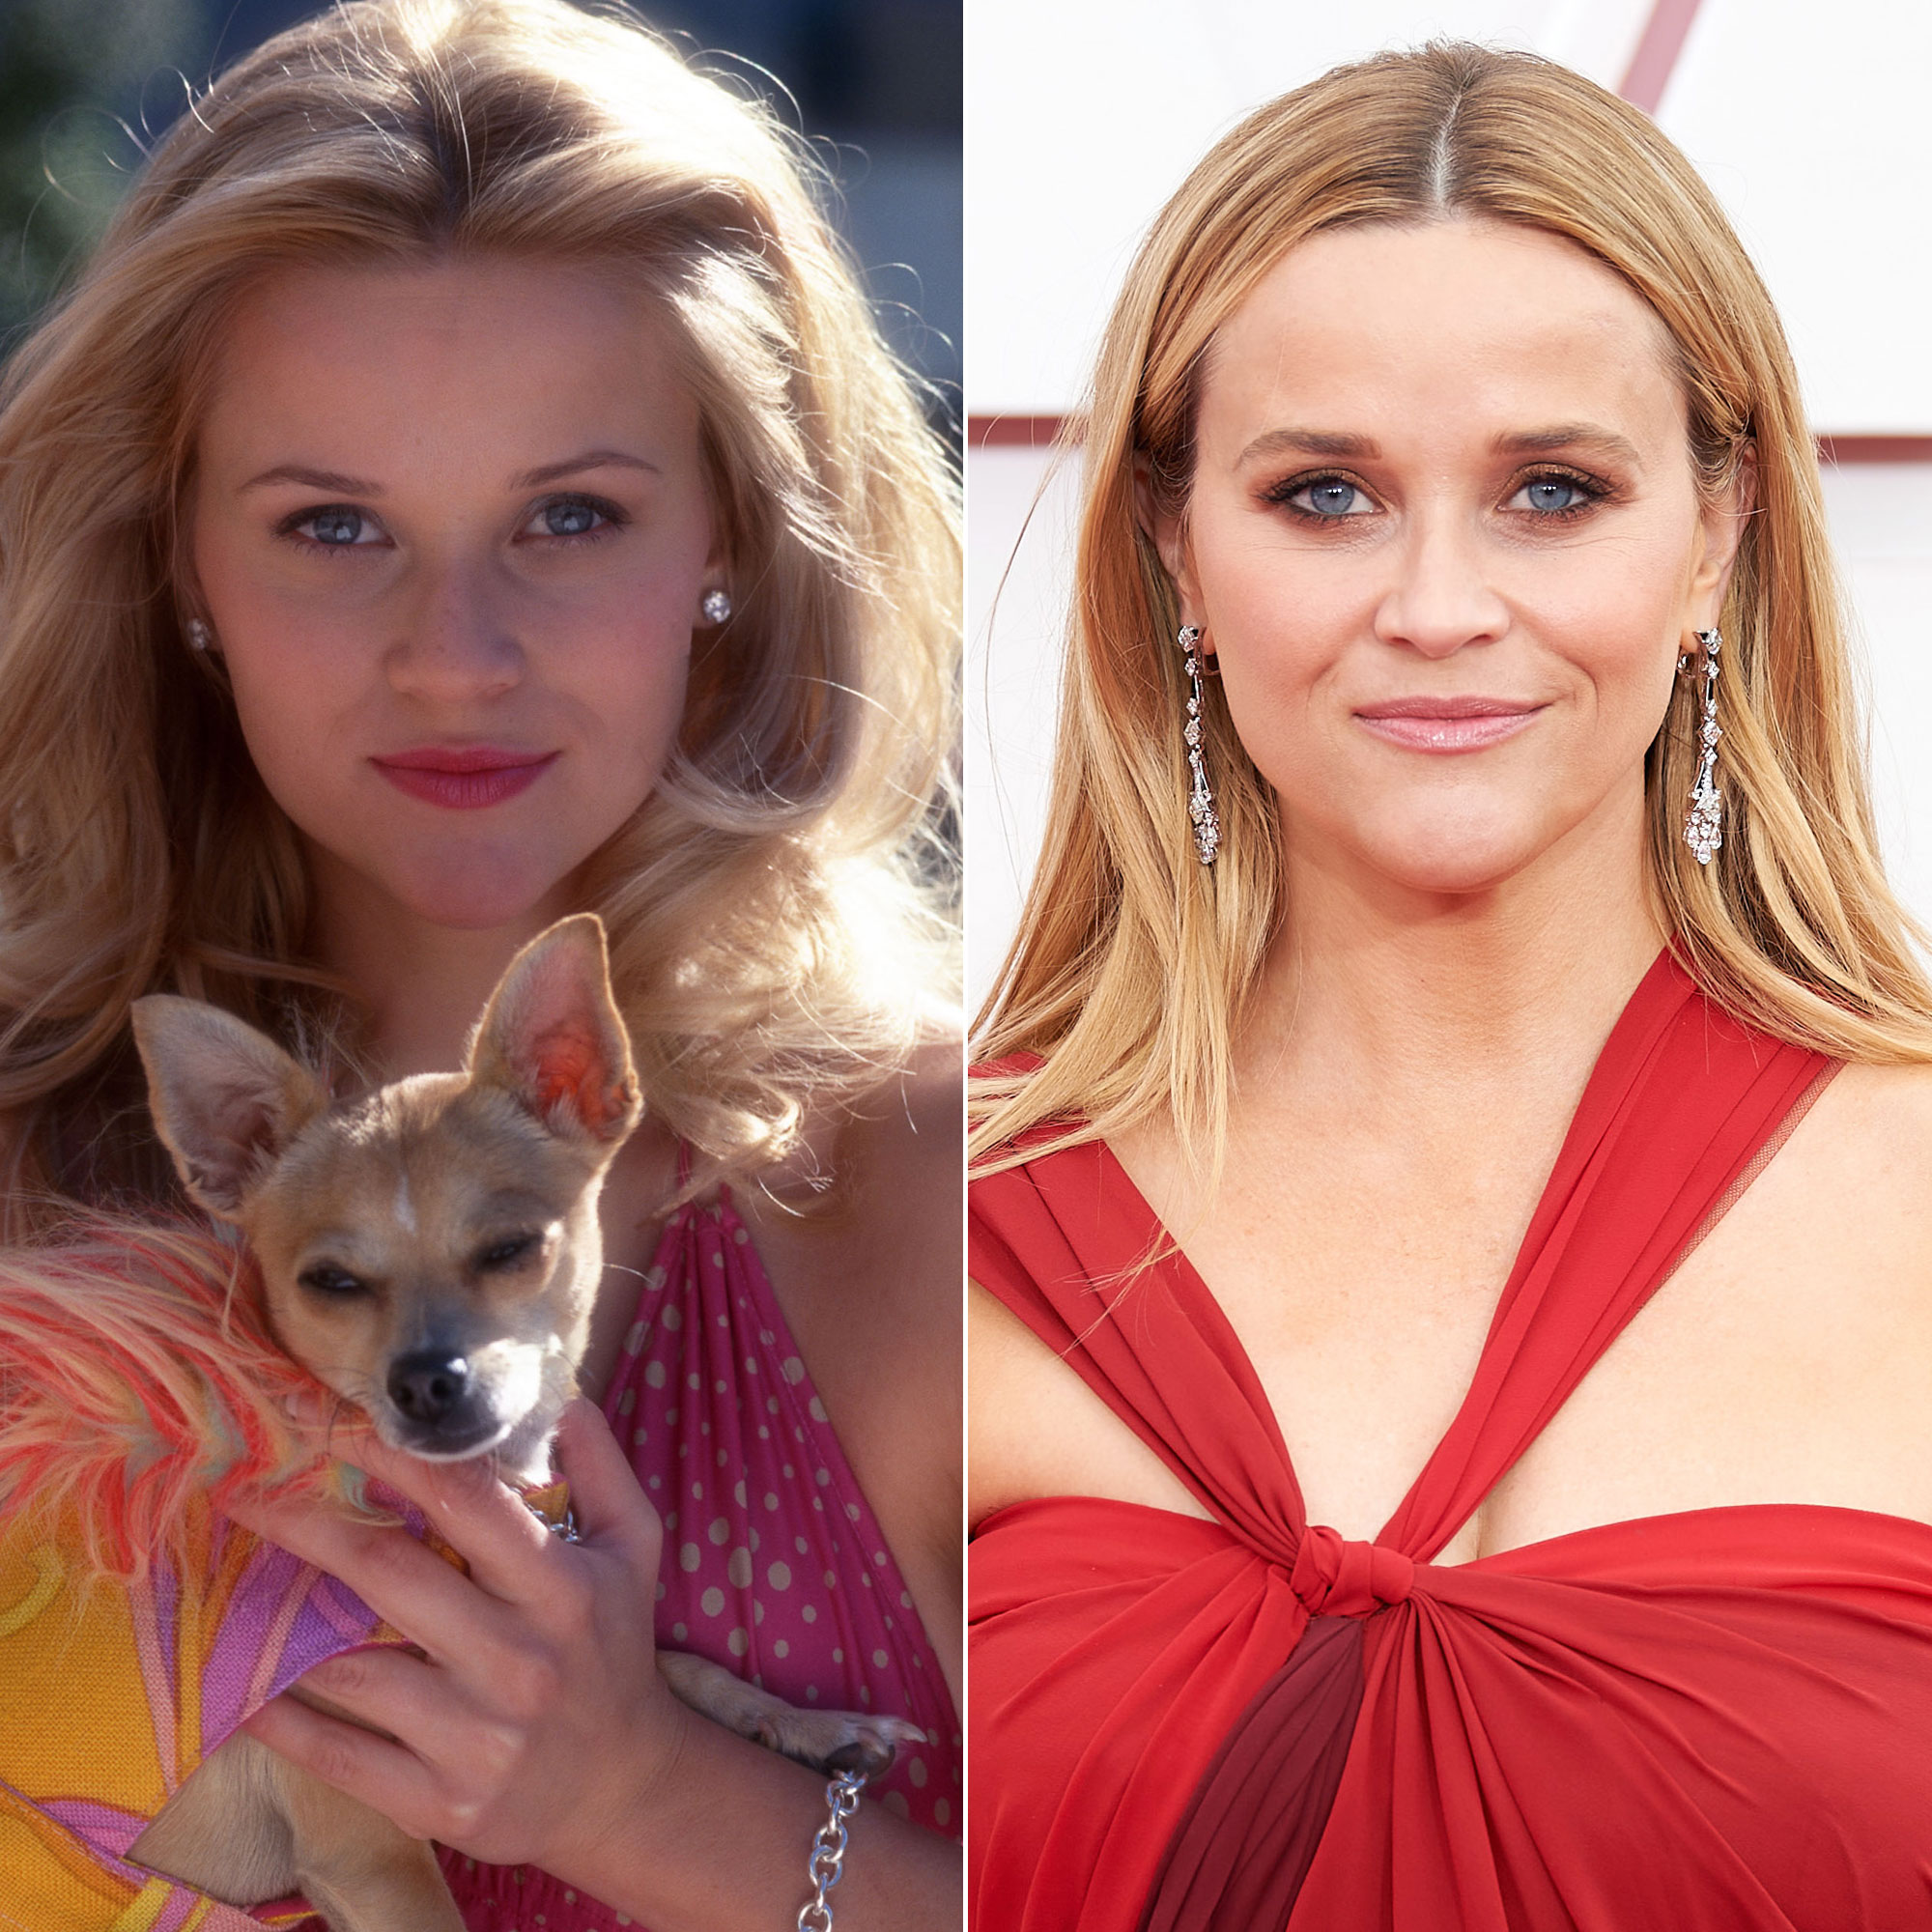 Legally Blonde Cast Where Are They Now?